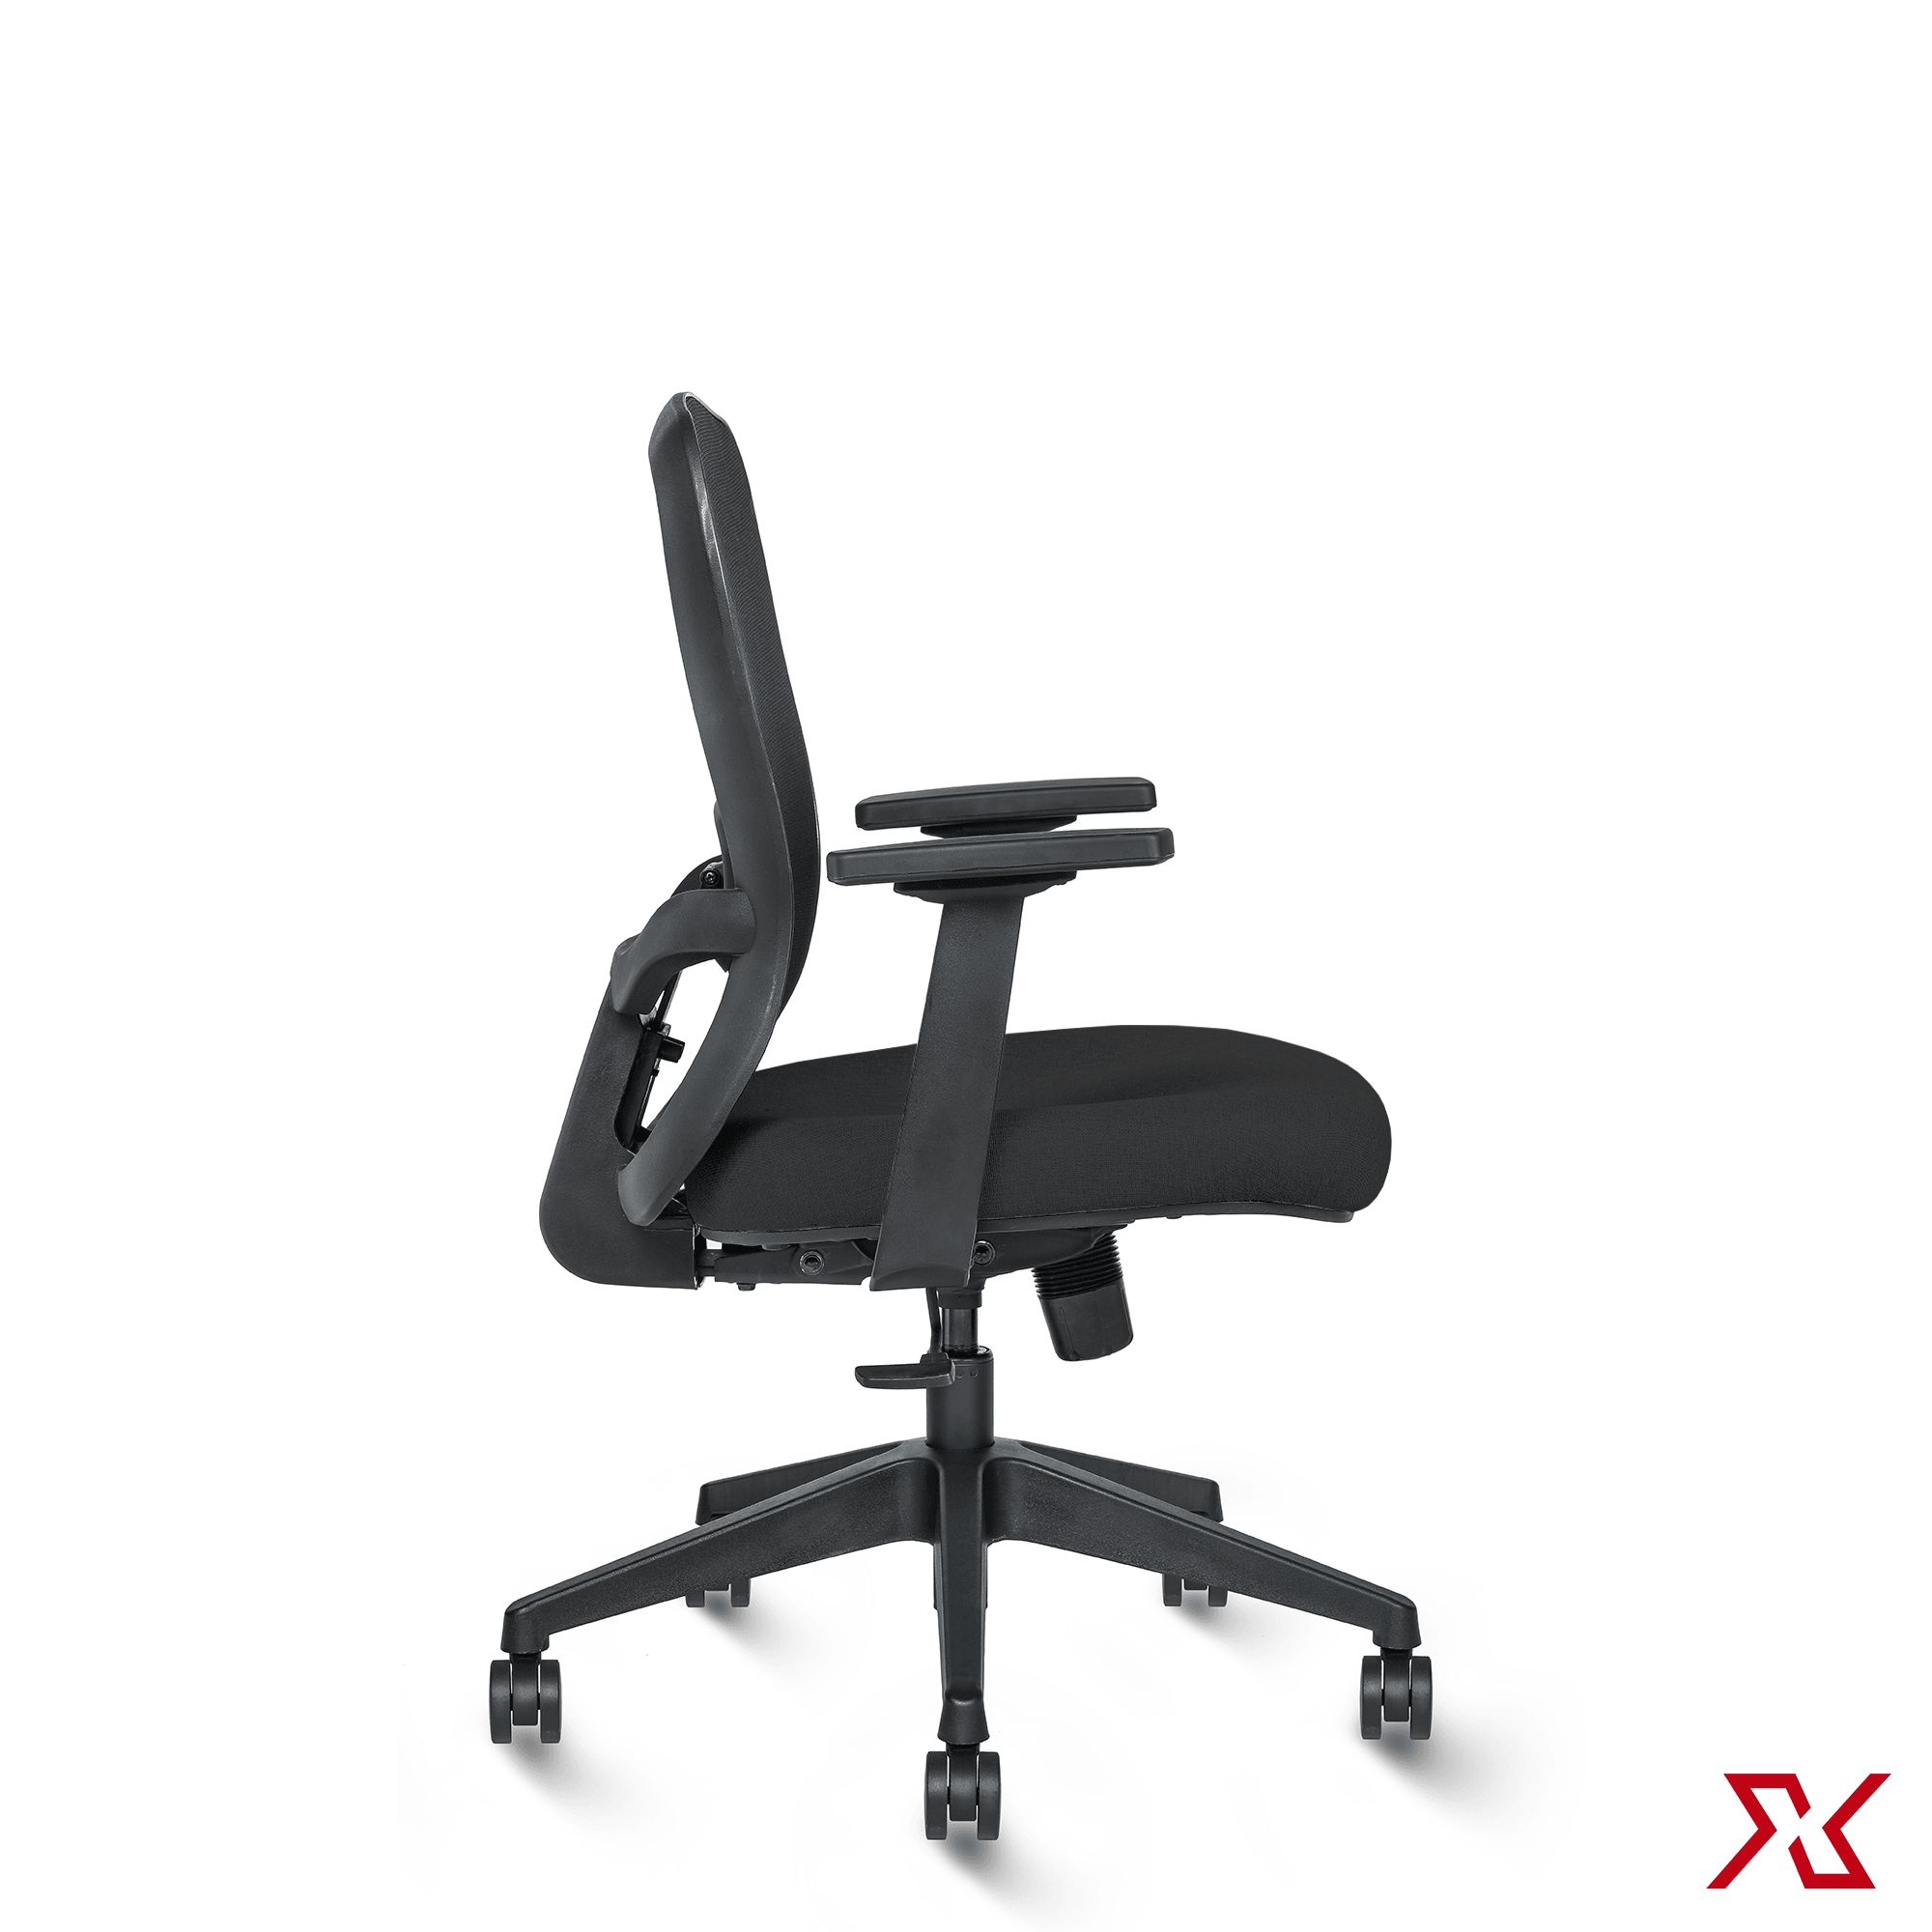 DUNE Medium Back Fly (Black Chair) - Exclusiff Seating Sytems